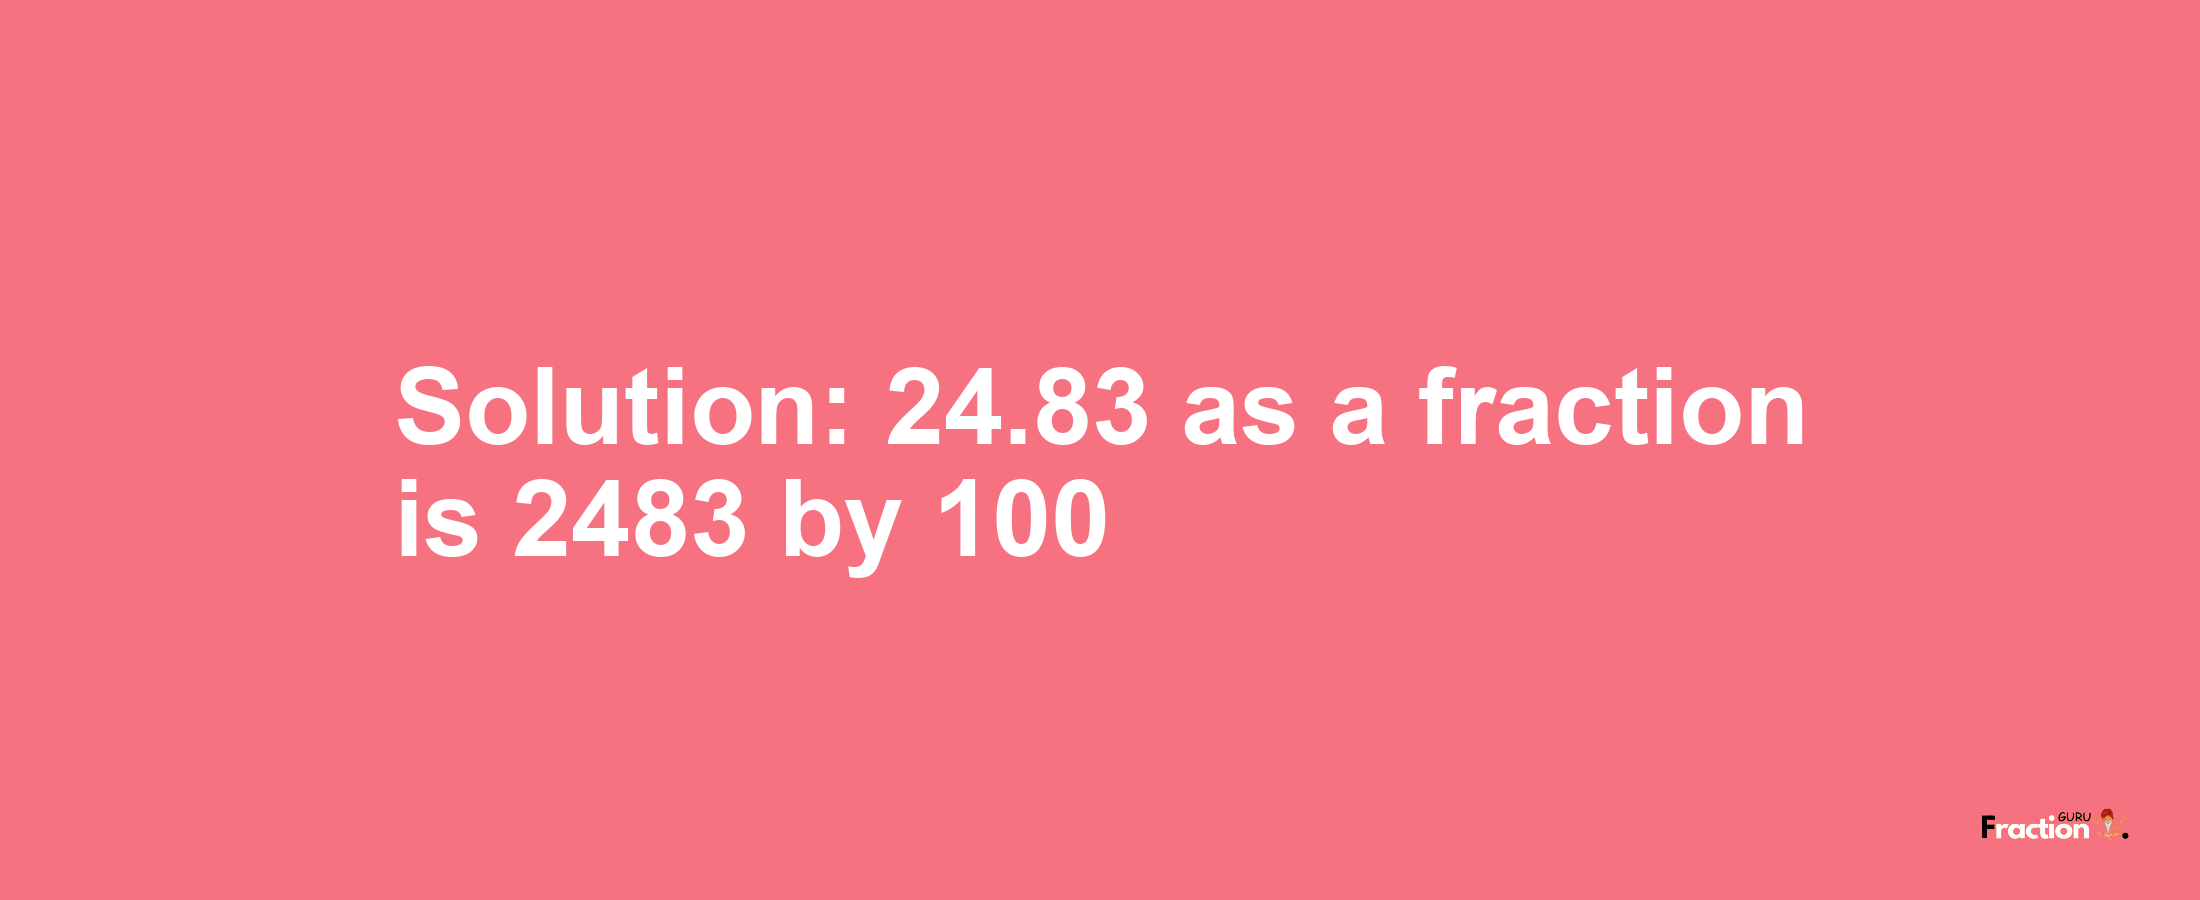 Solution:24.83 as a fraction is 2483/100